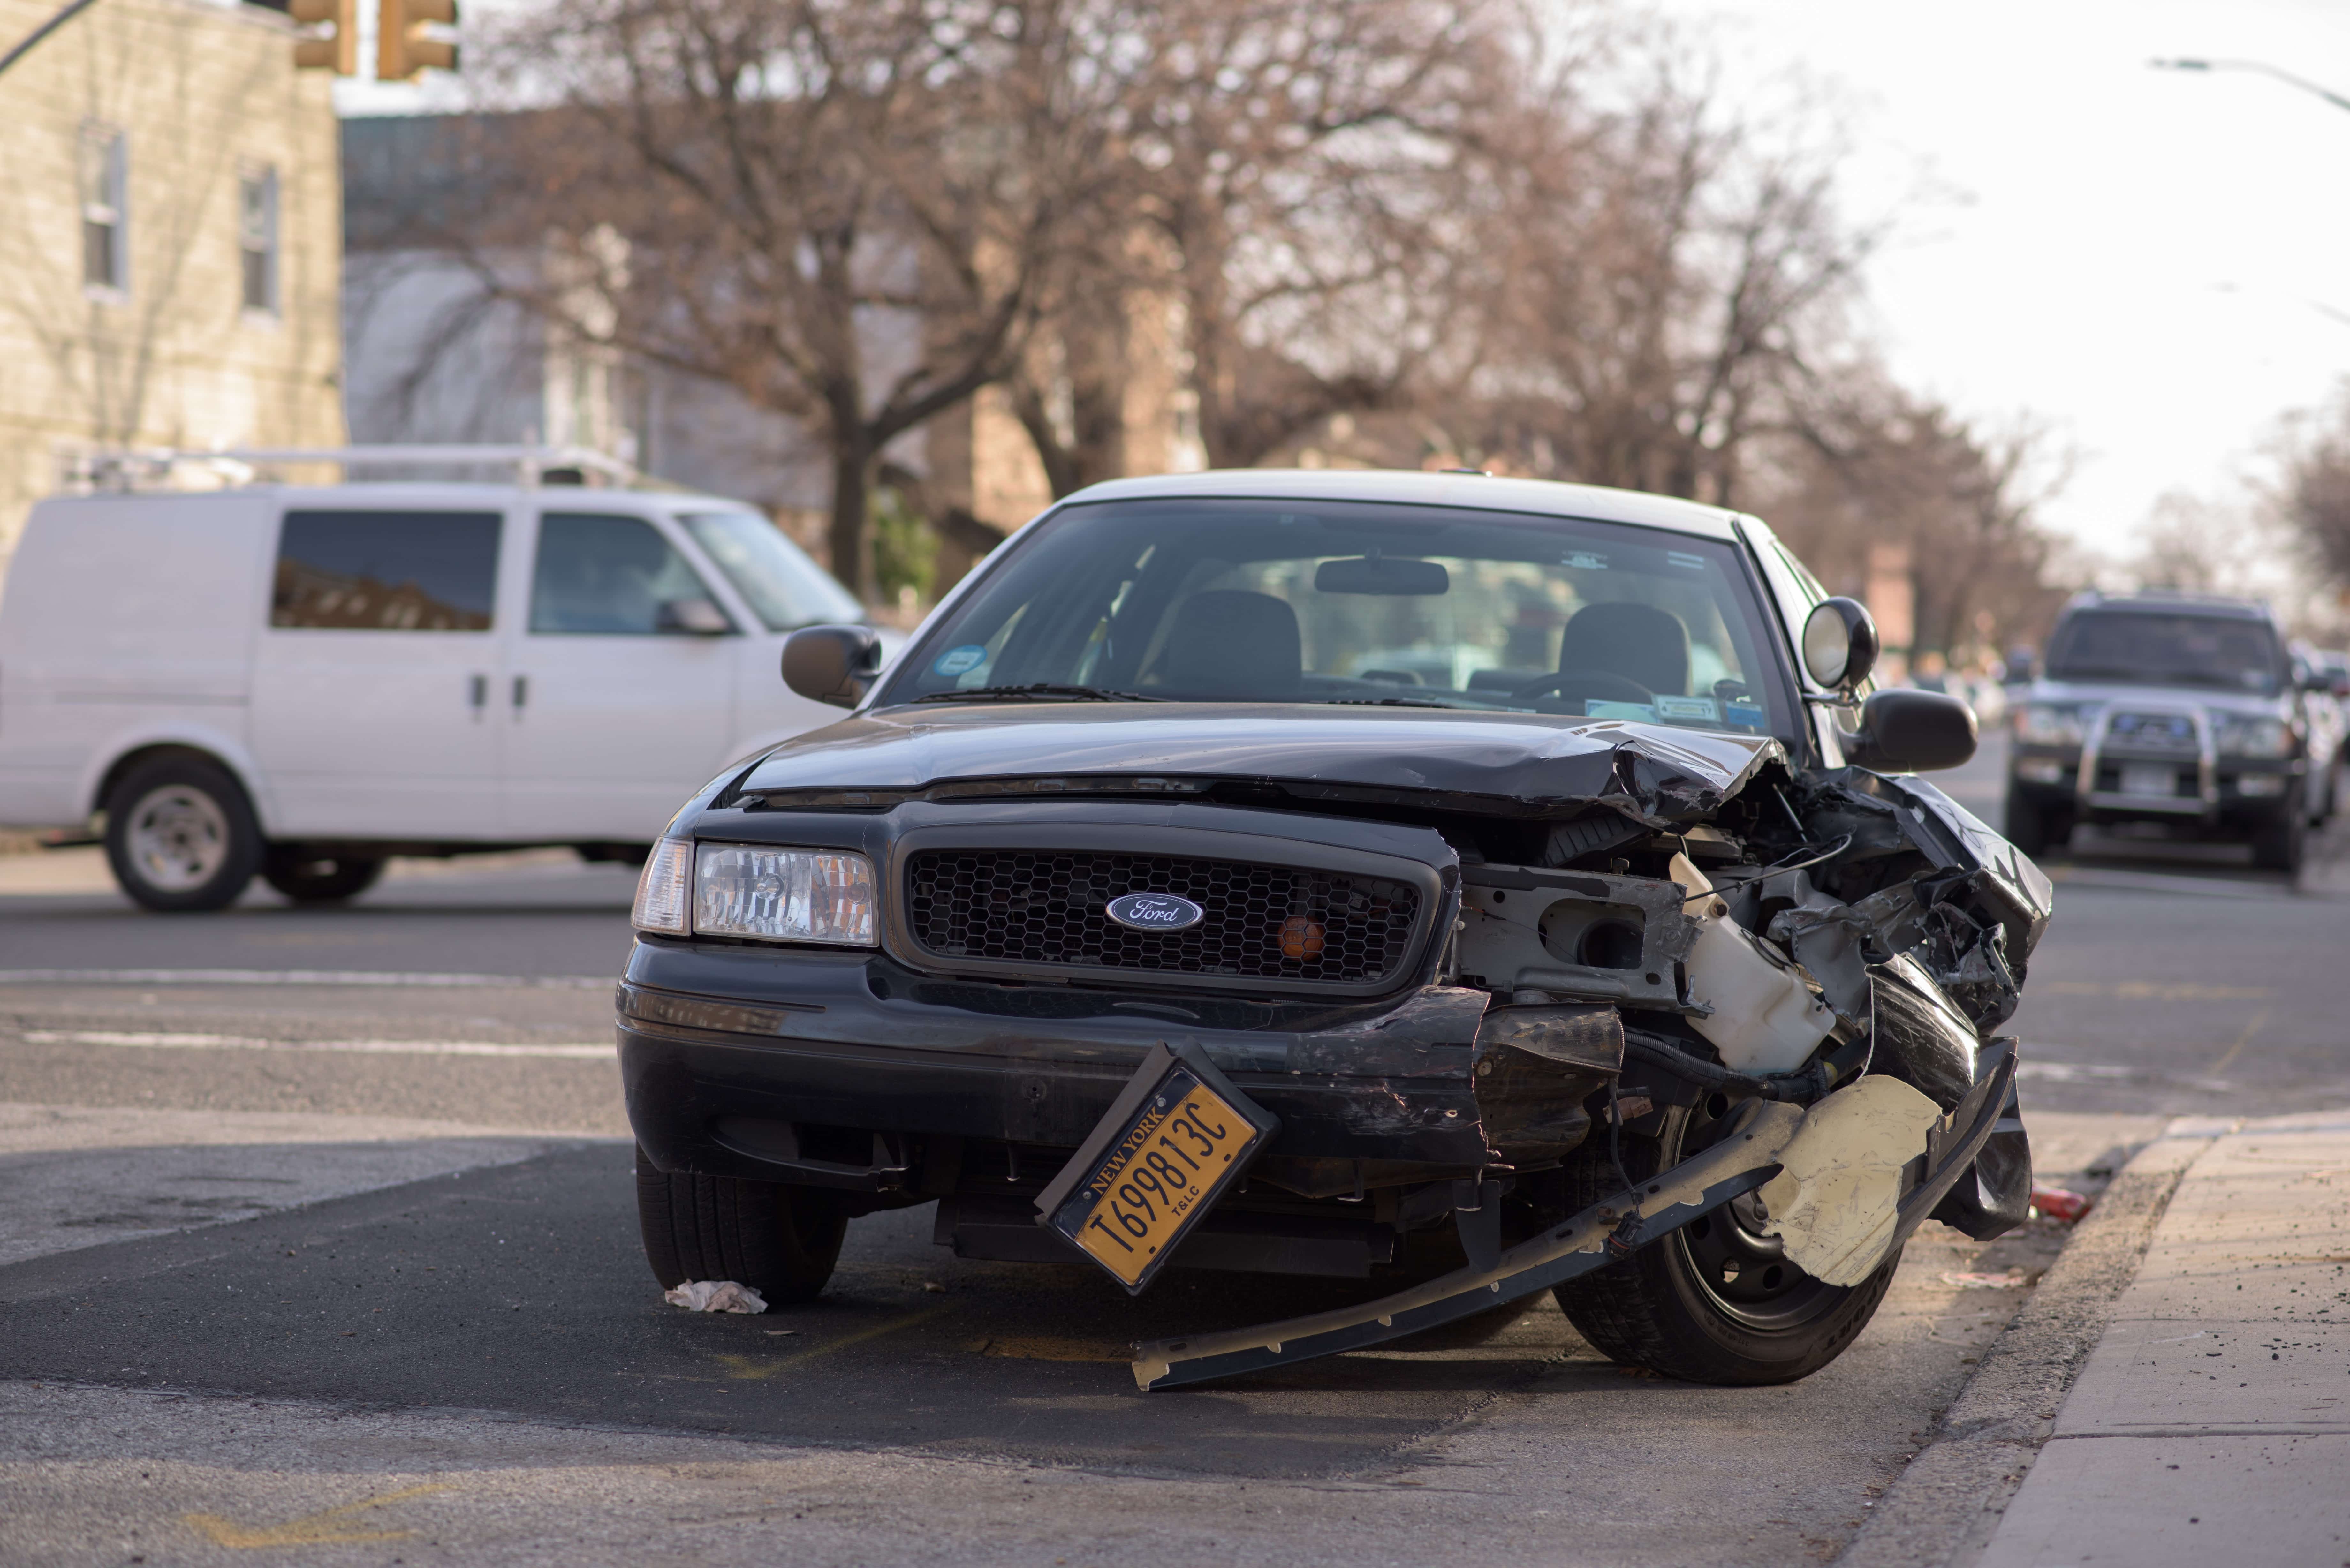 A damaged car, representing a personal injury settlement from a motor vehicle accident